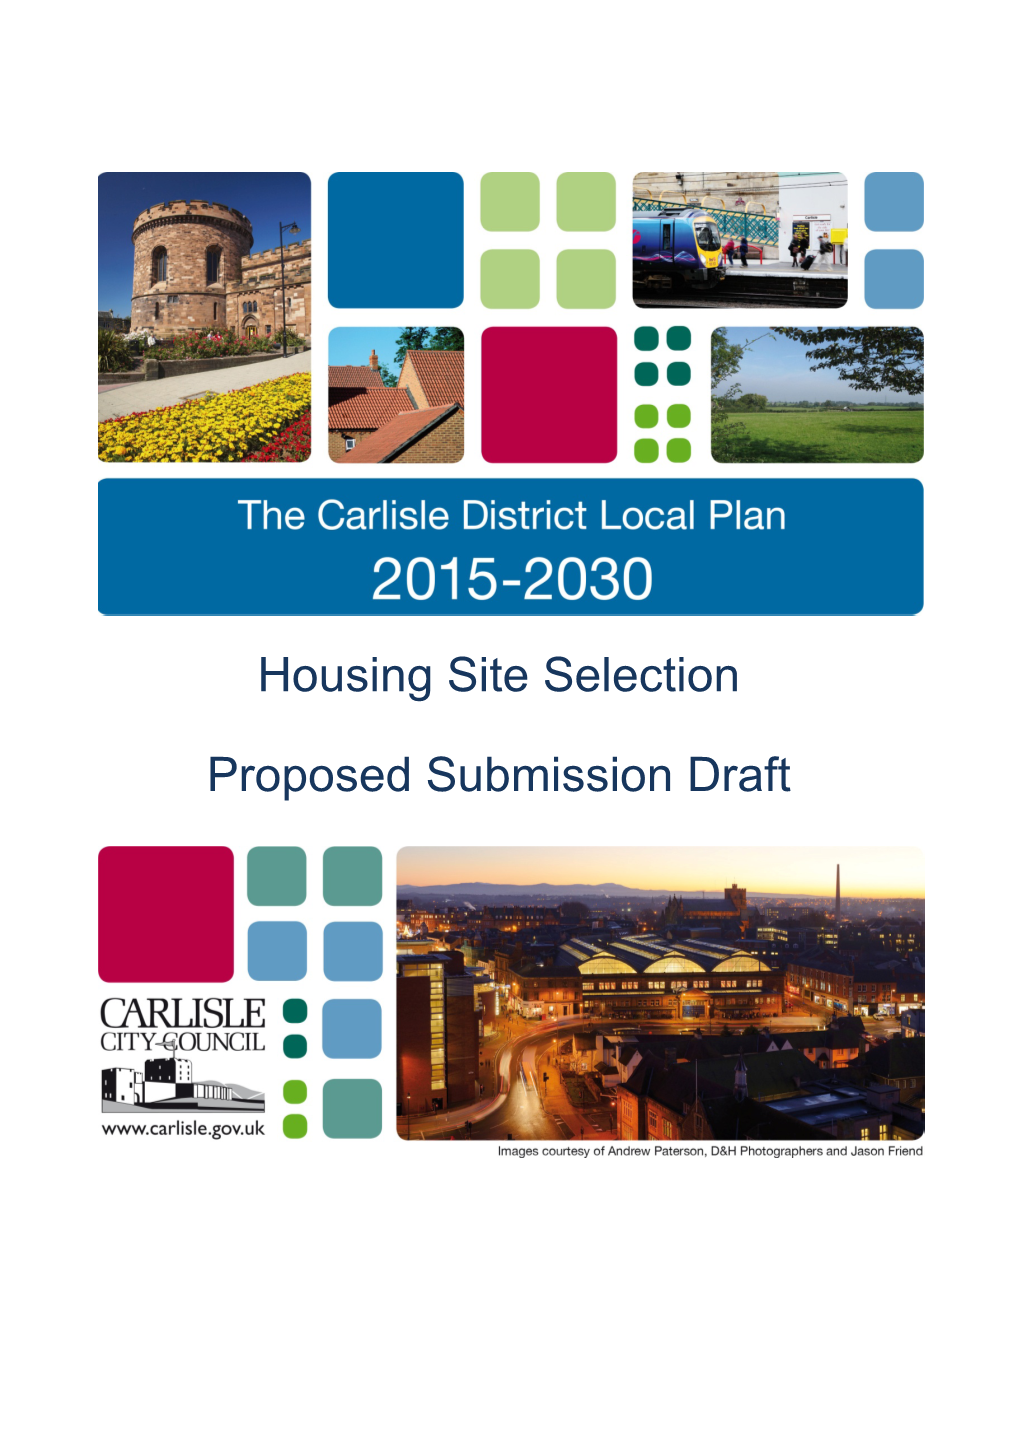 Housing Site Selection Proposed Submission Draft